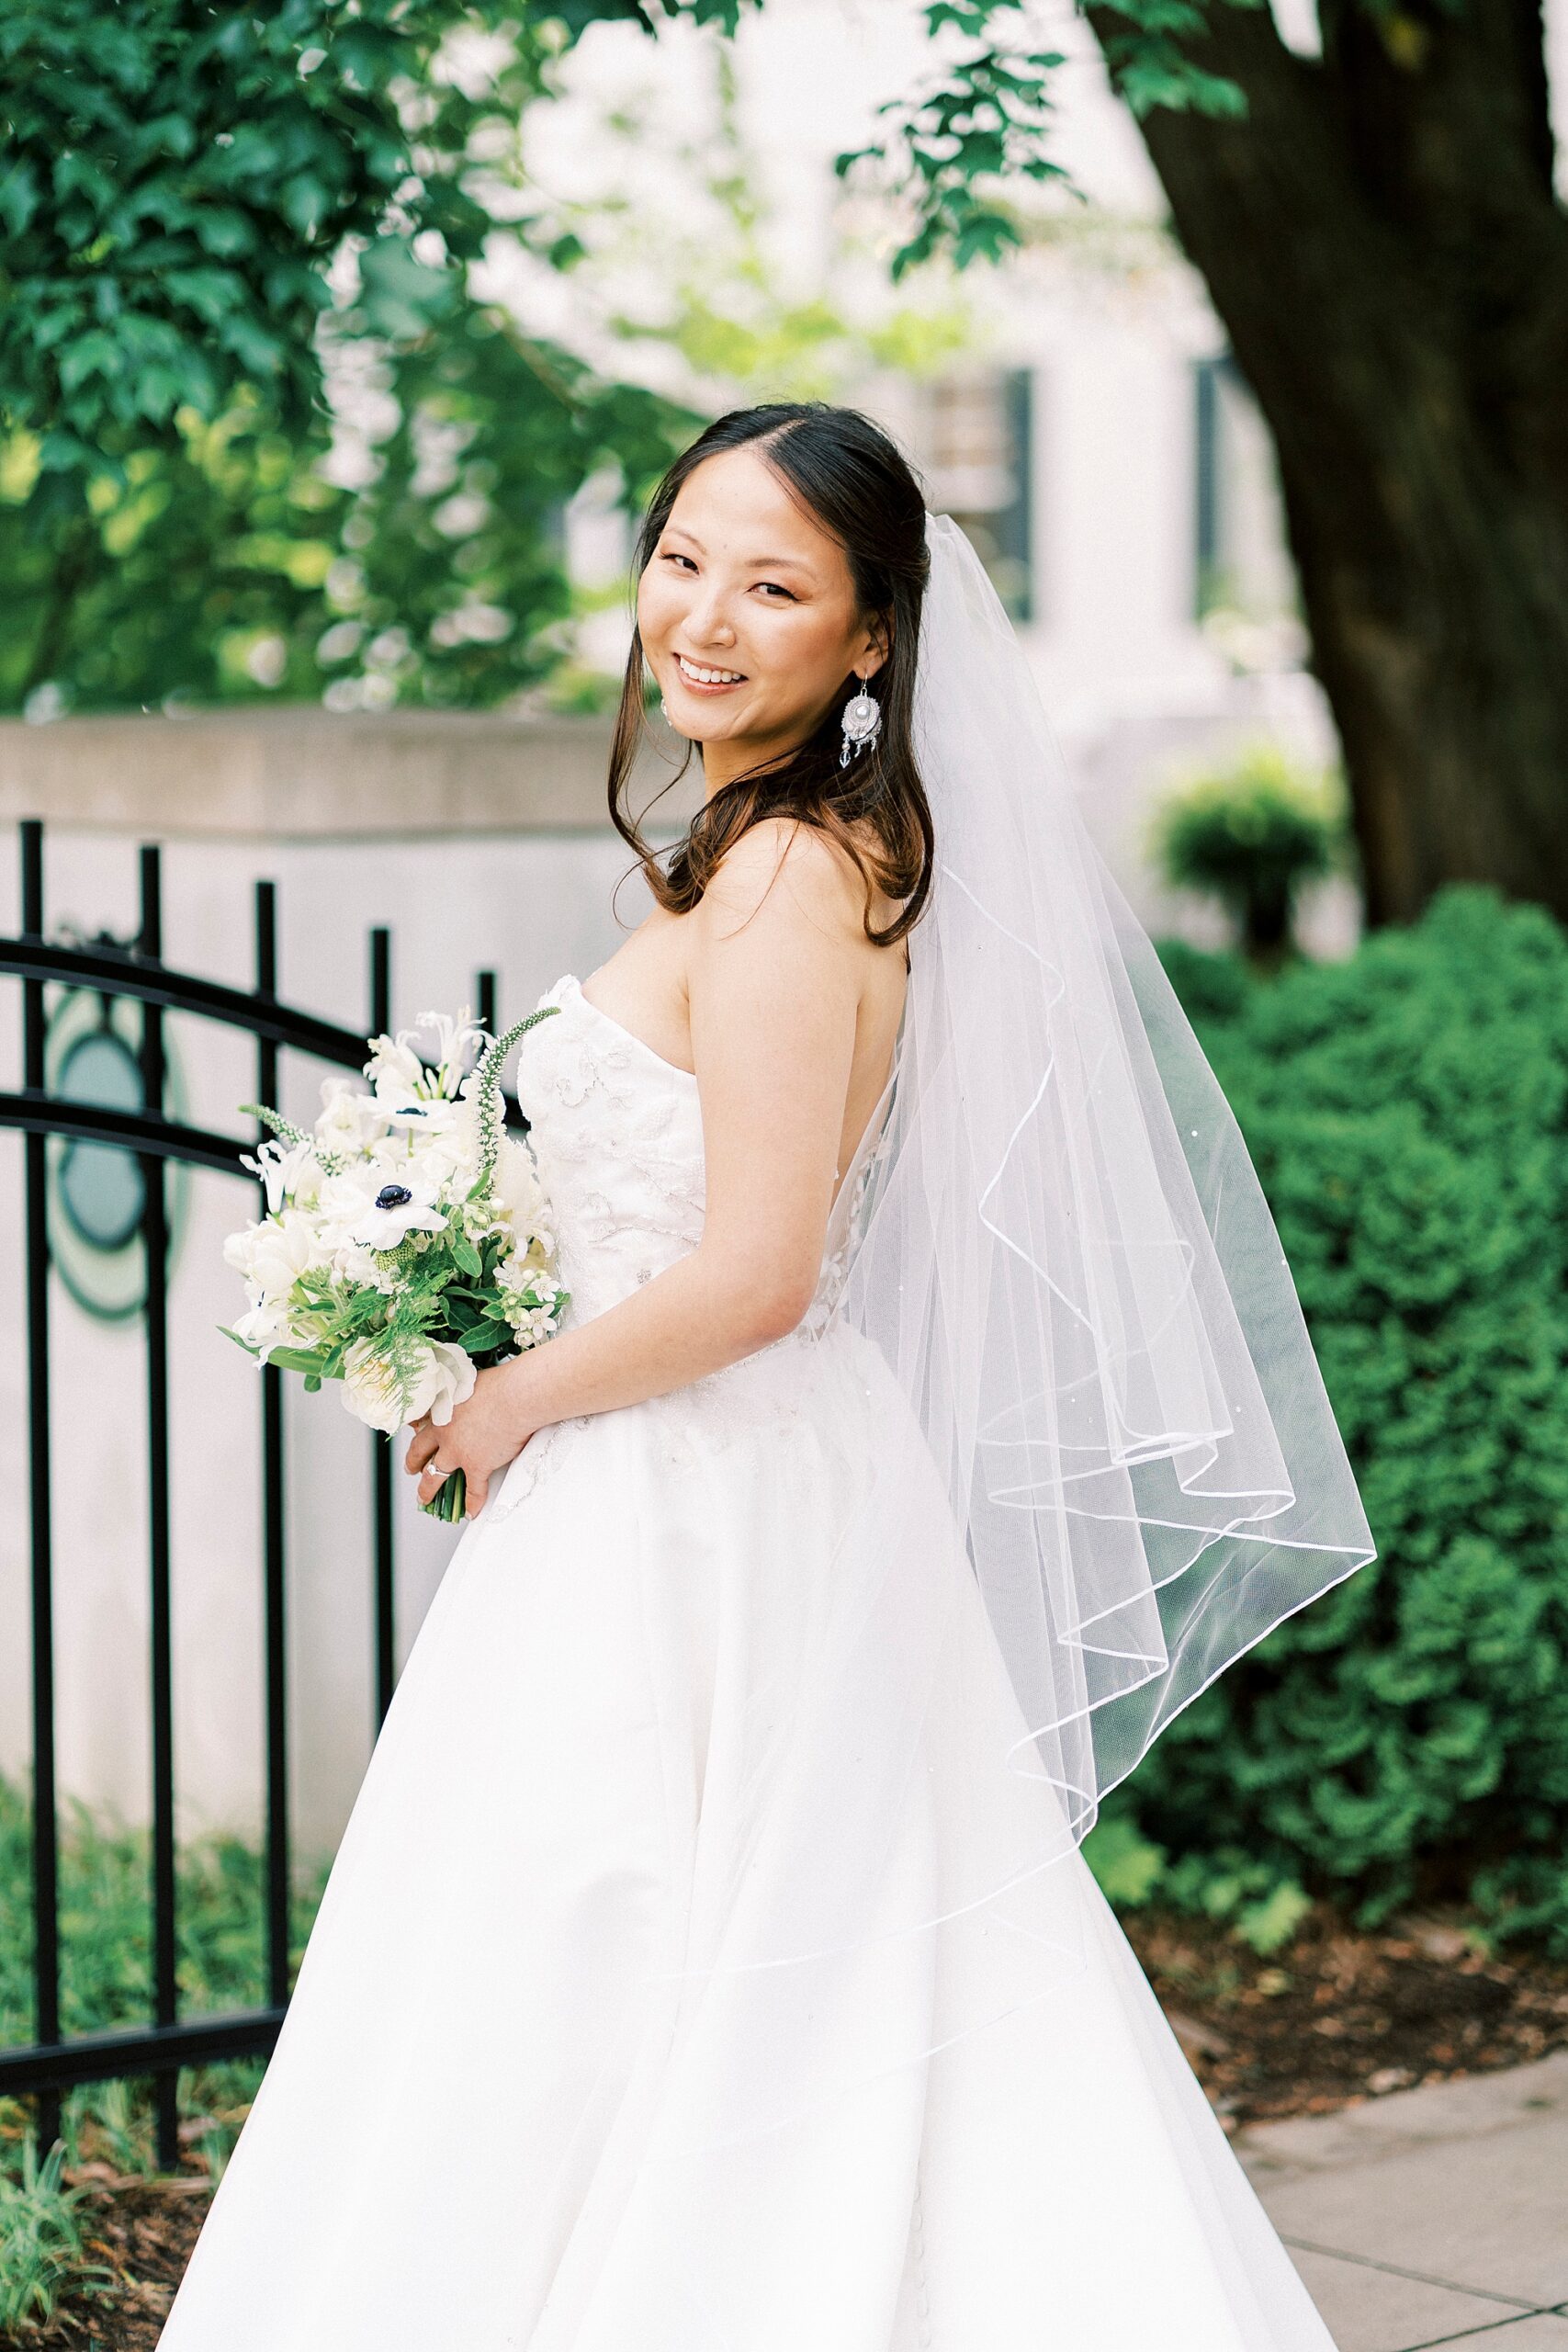 bride smiles looking over shoulder with veil behind her by wrought iron gate